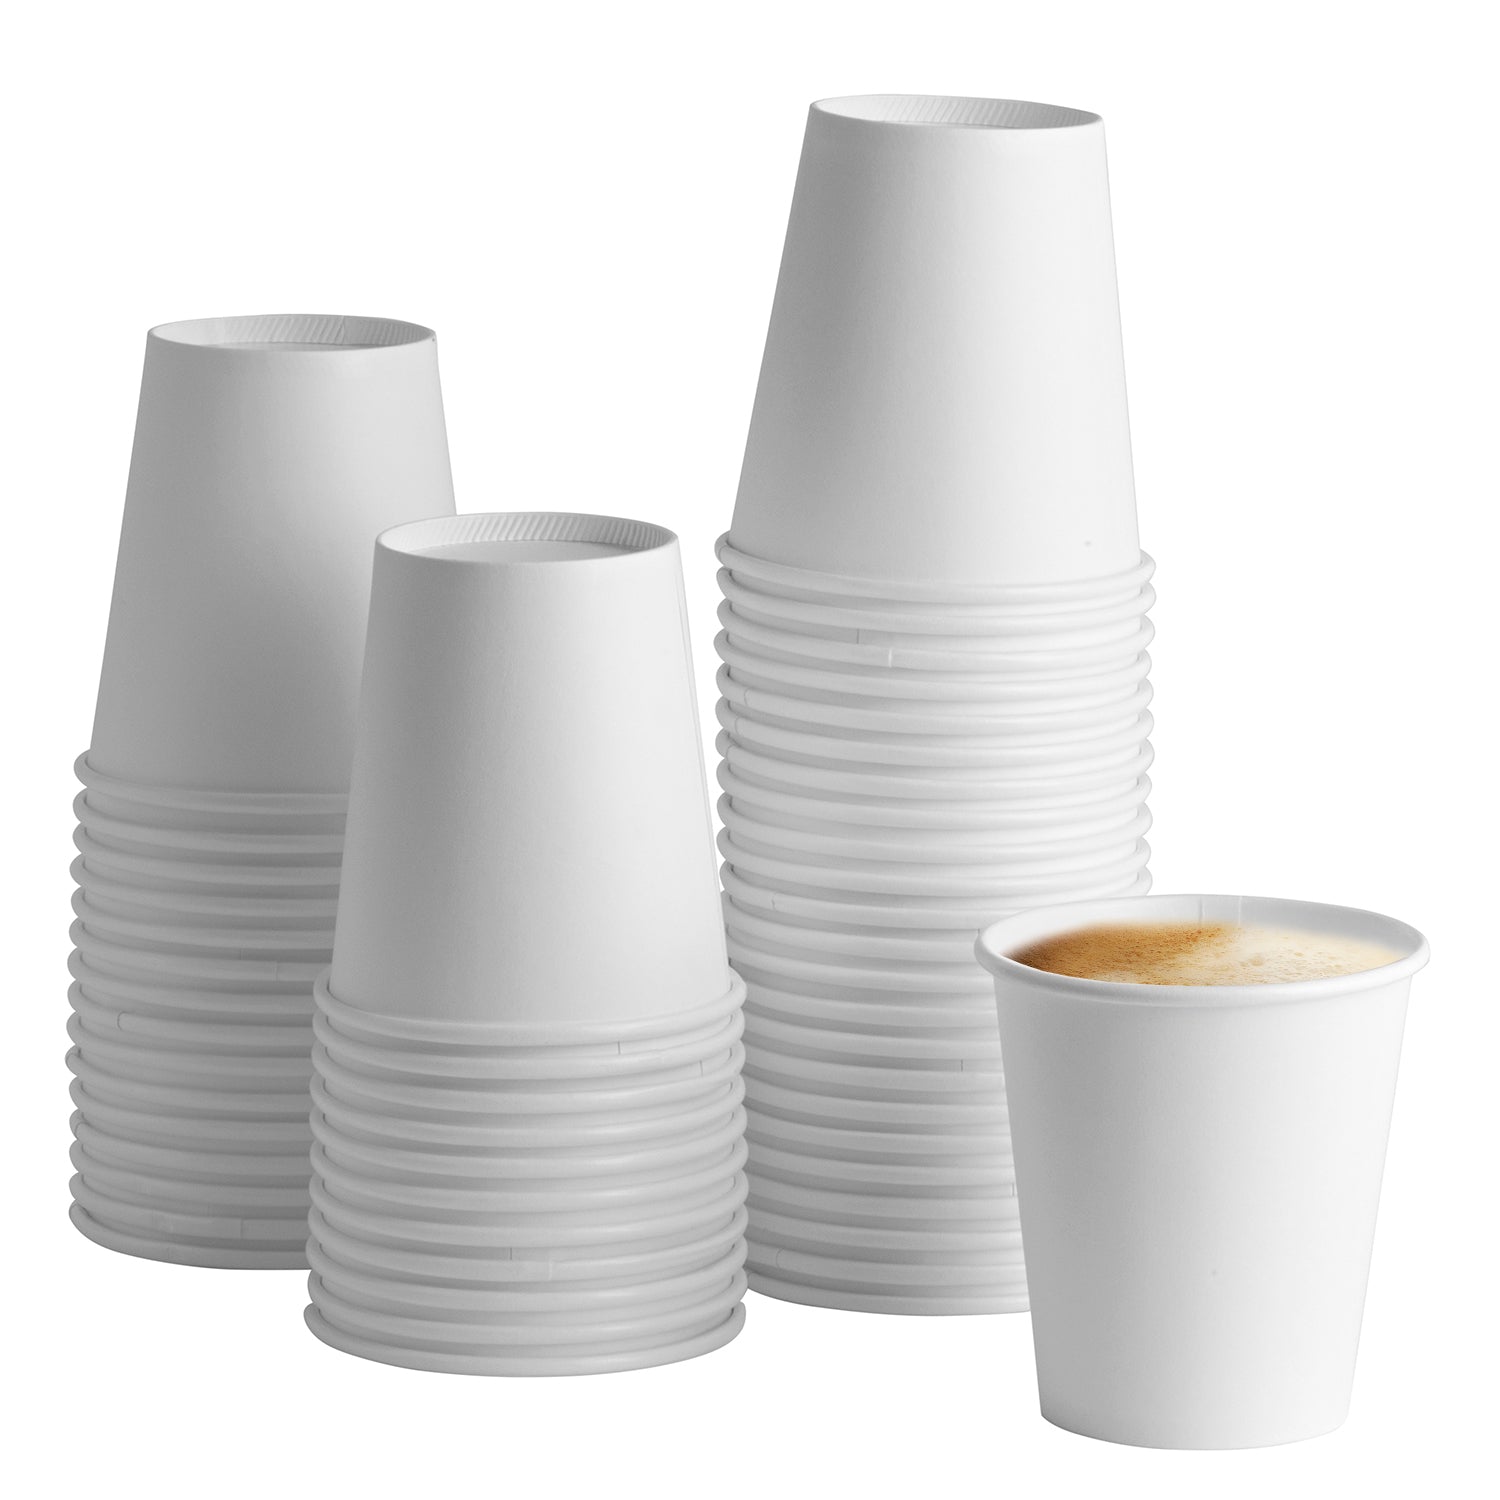 100 Pack] 10oz Disposable White Paper Coffee Cups with Black Dome